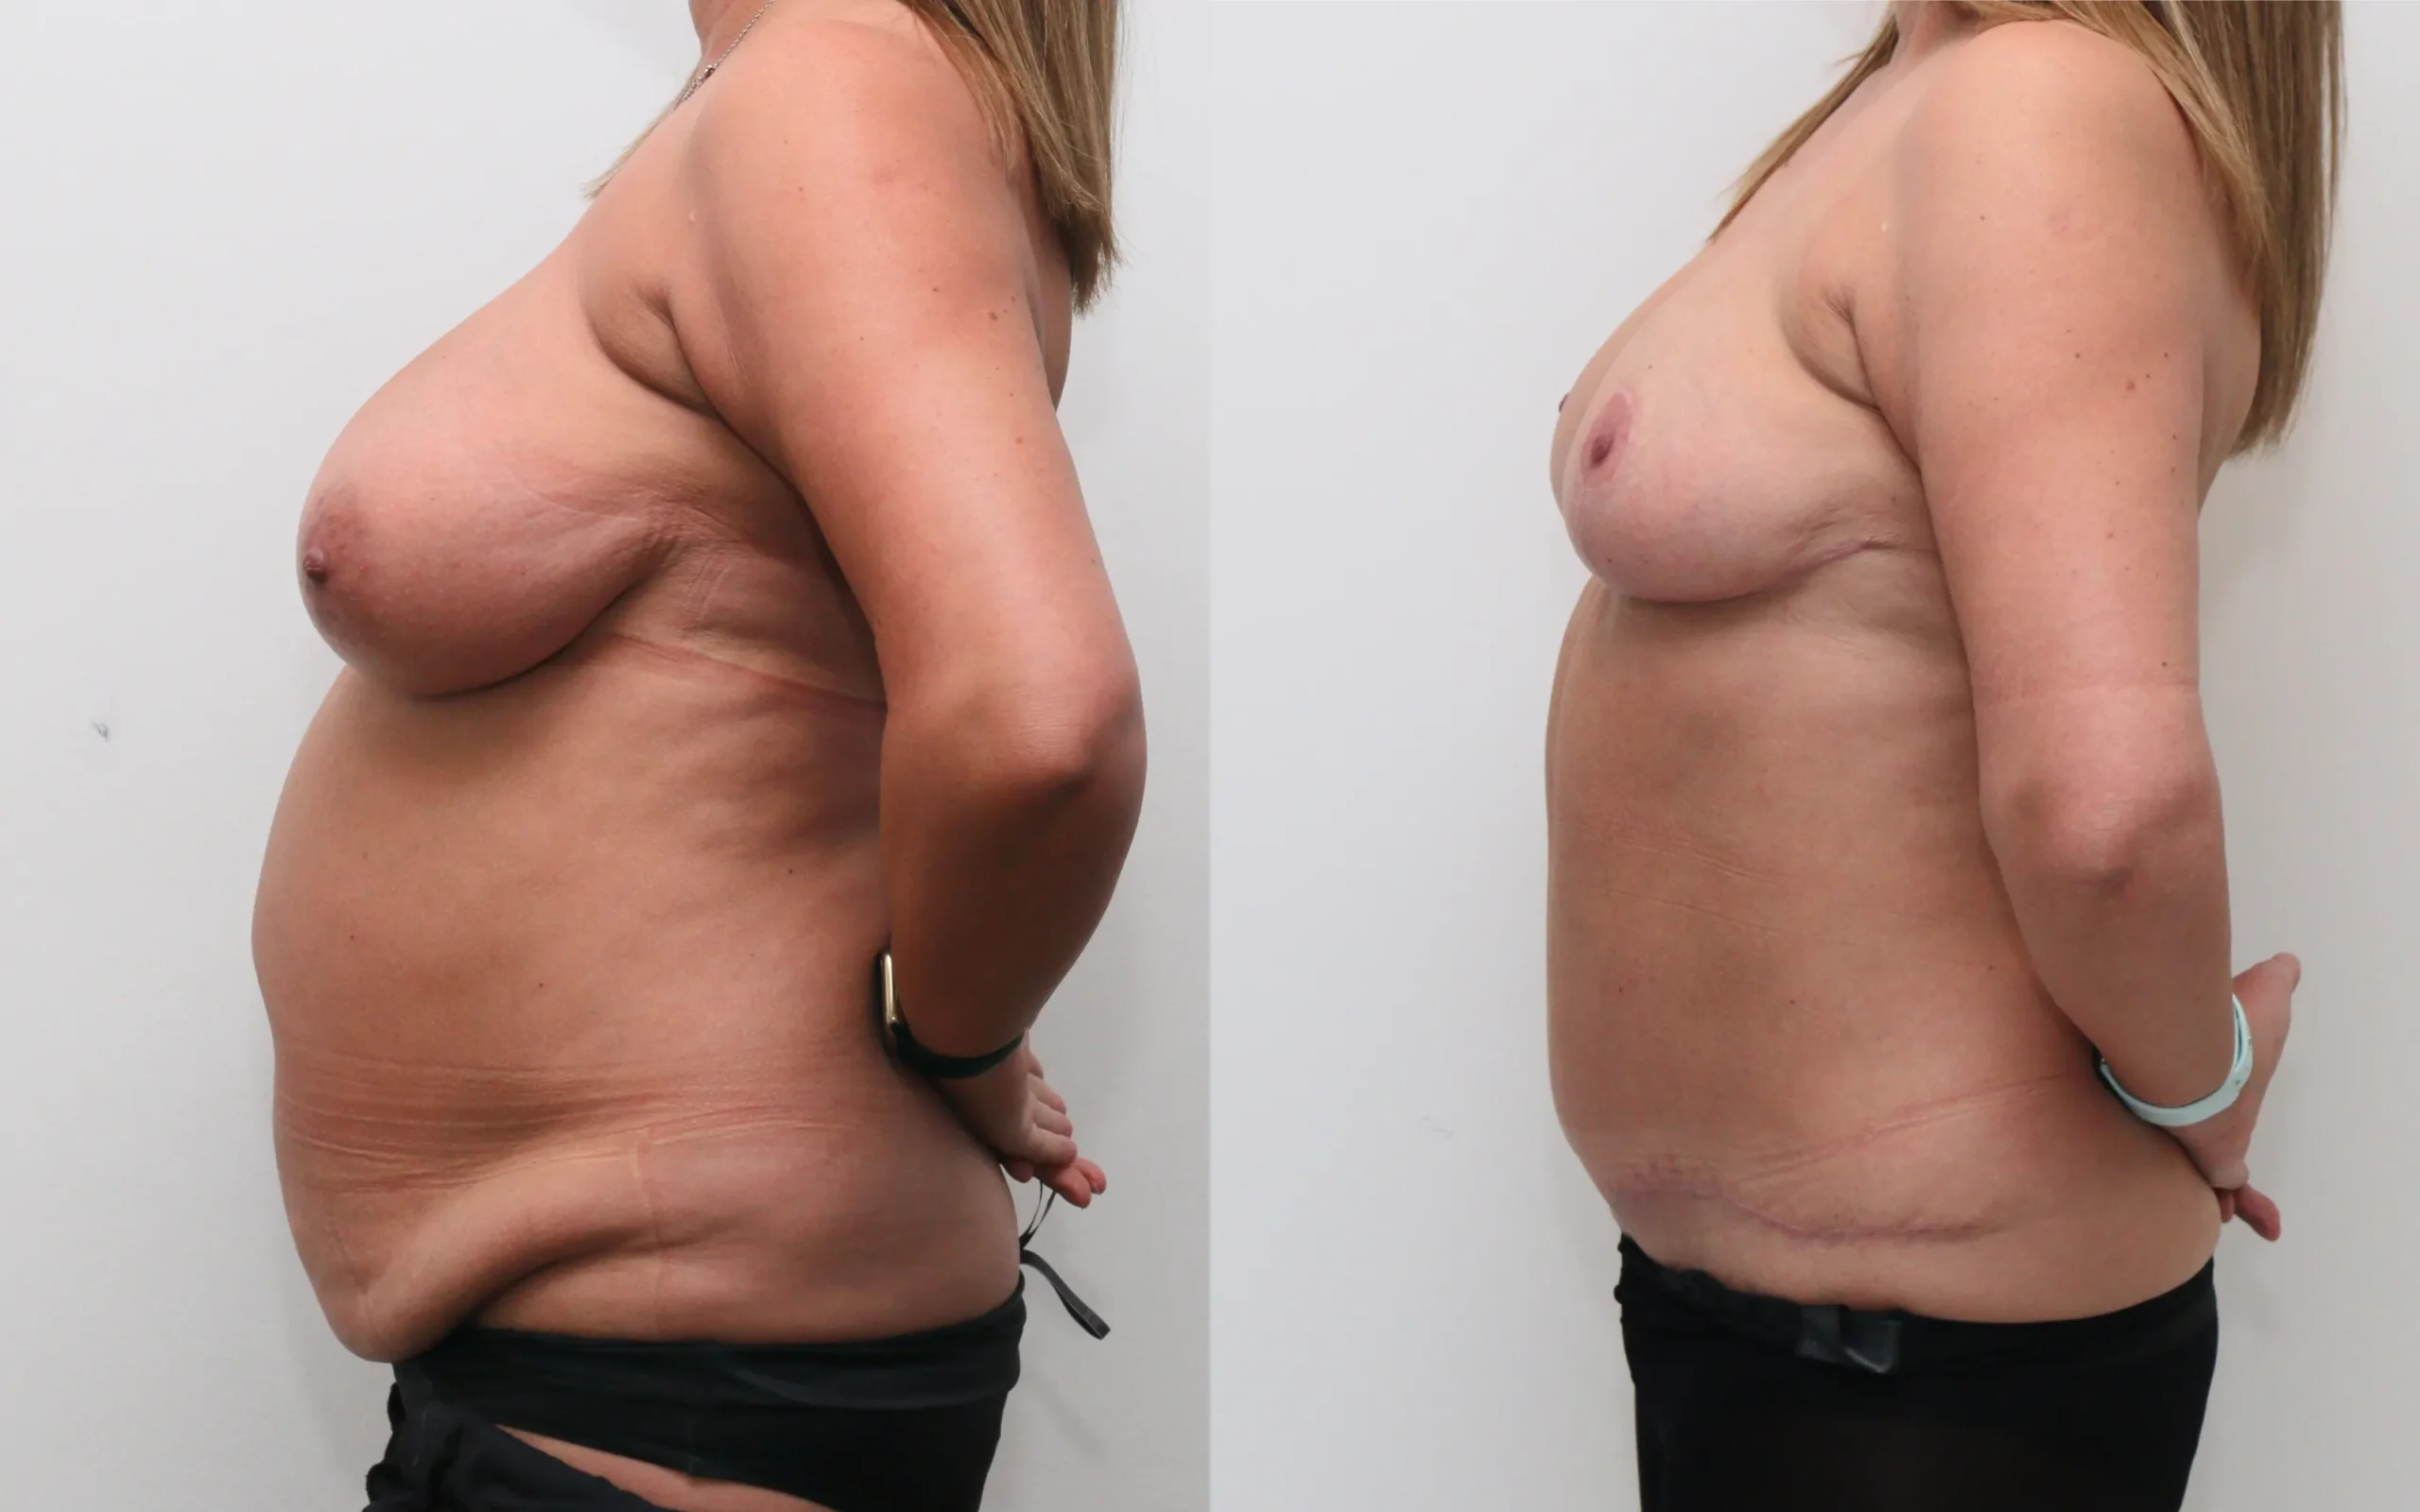 Breast reduction and full tummy tuck